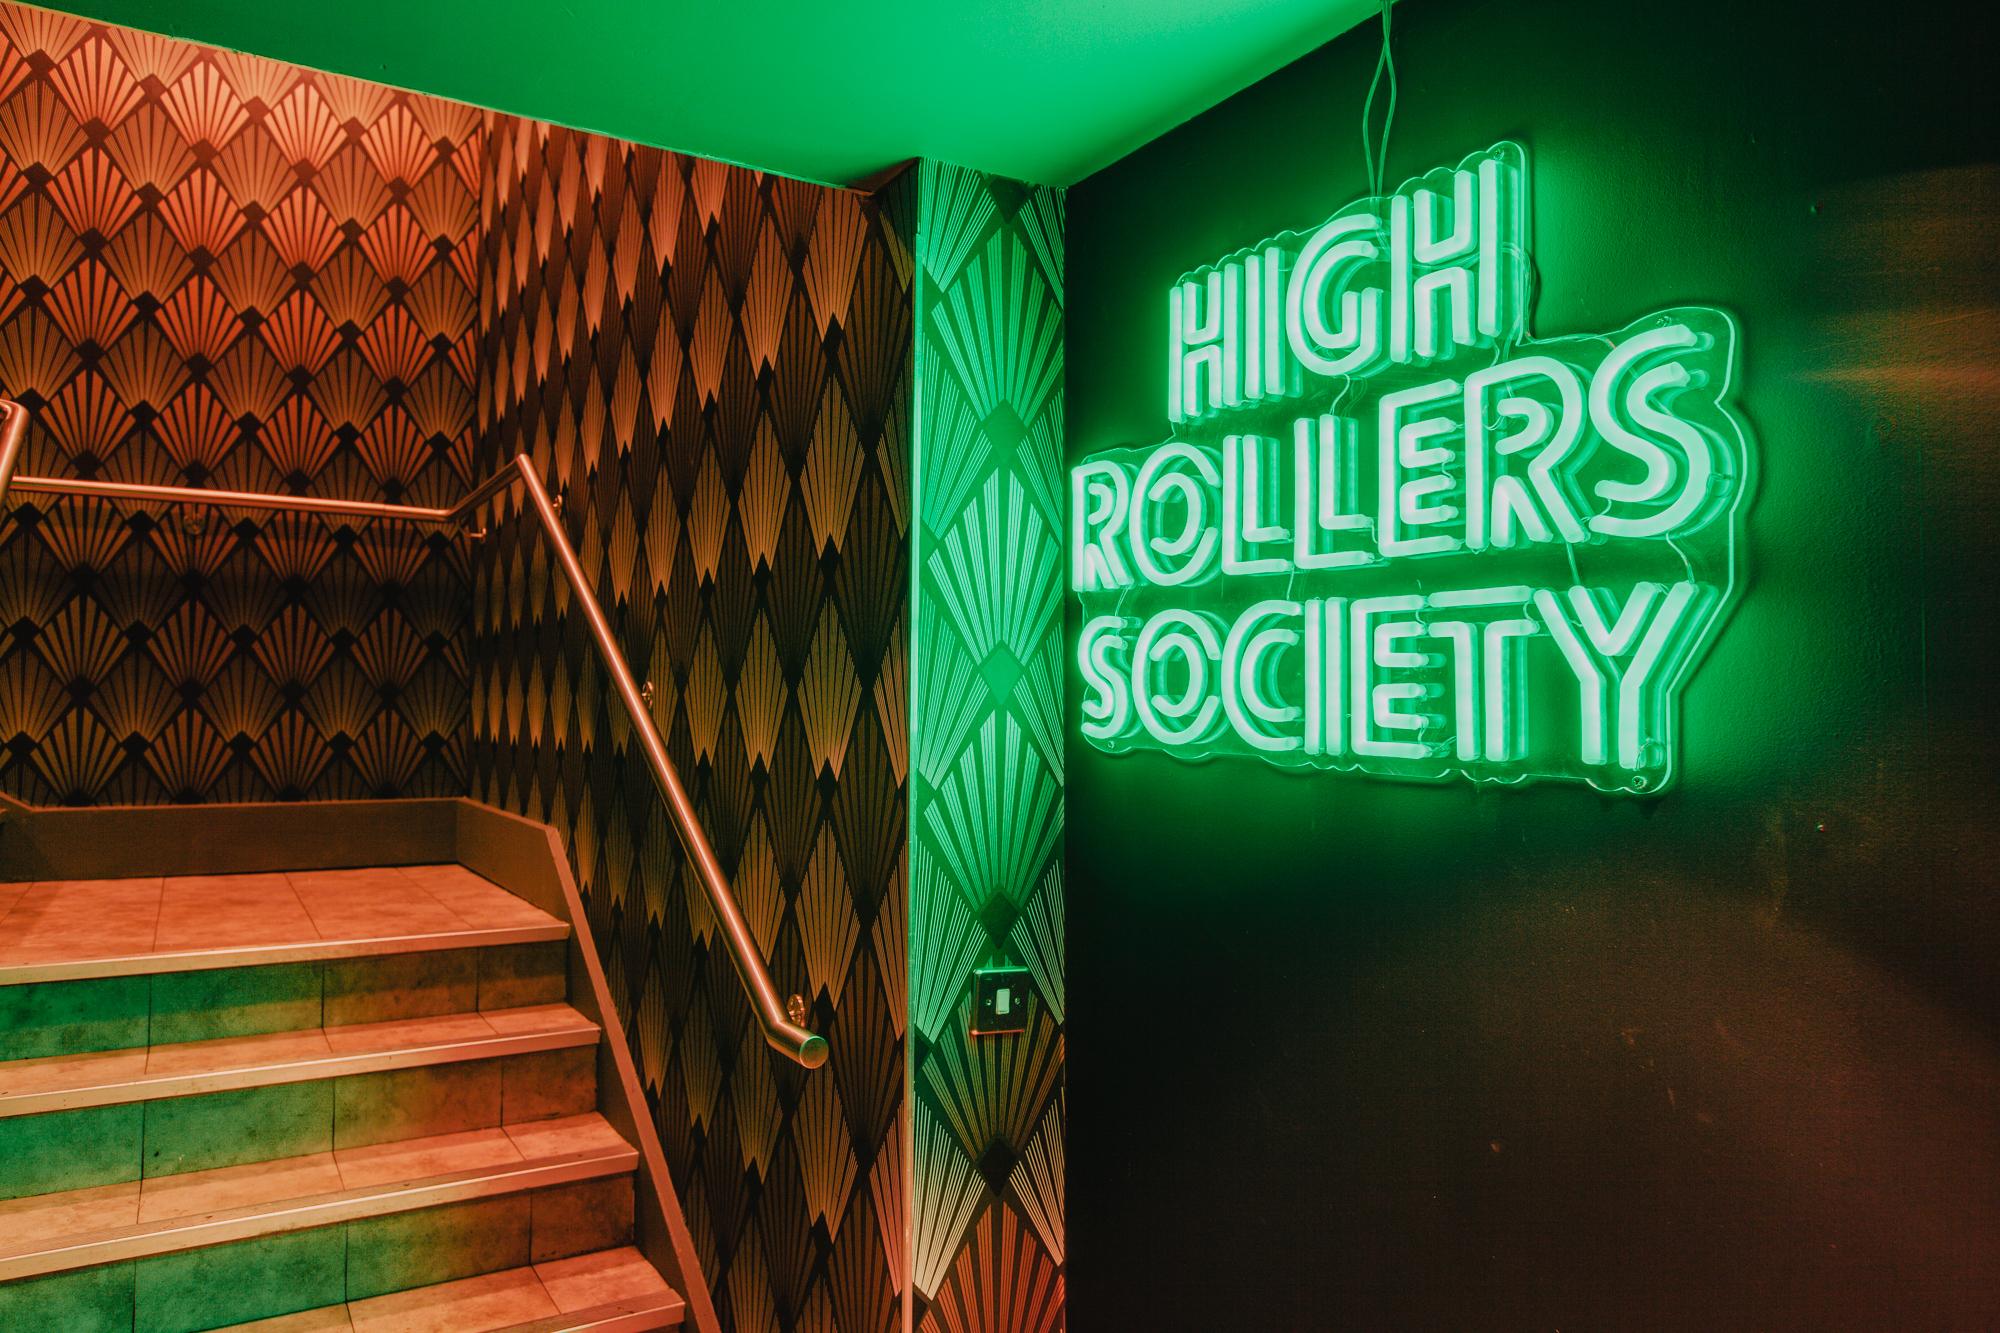 High Rollers Society, All Star Lanes Brick Lane photo #1